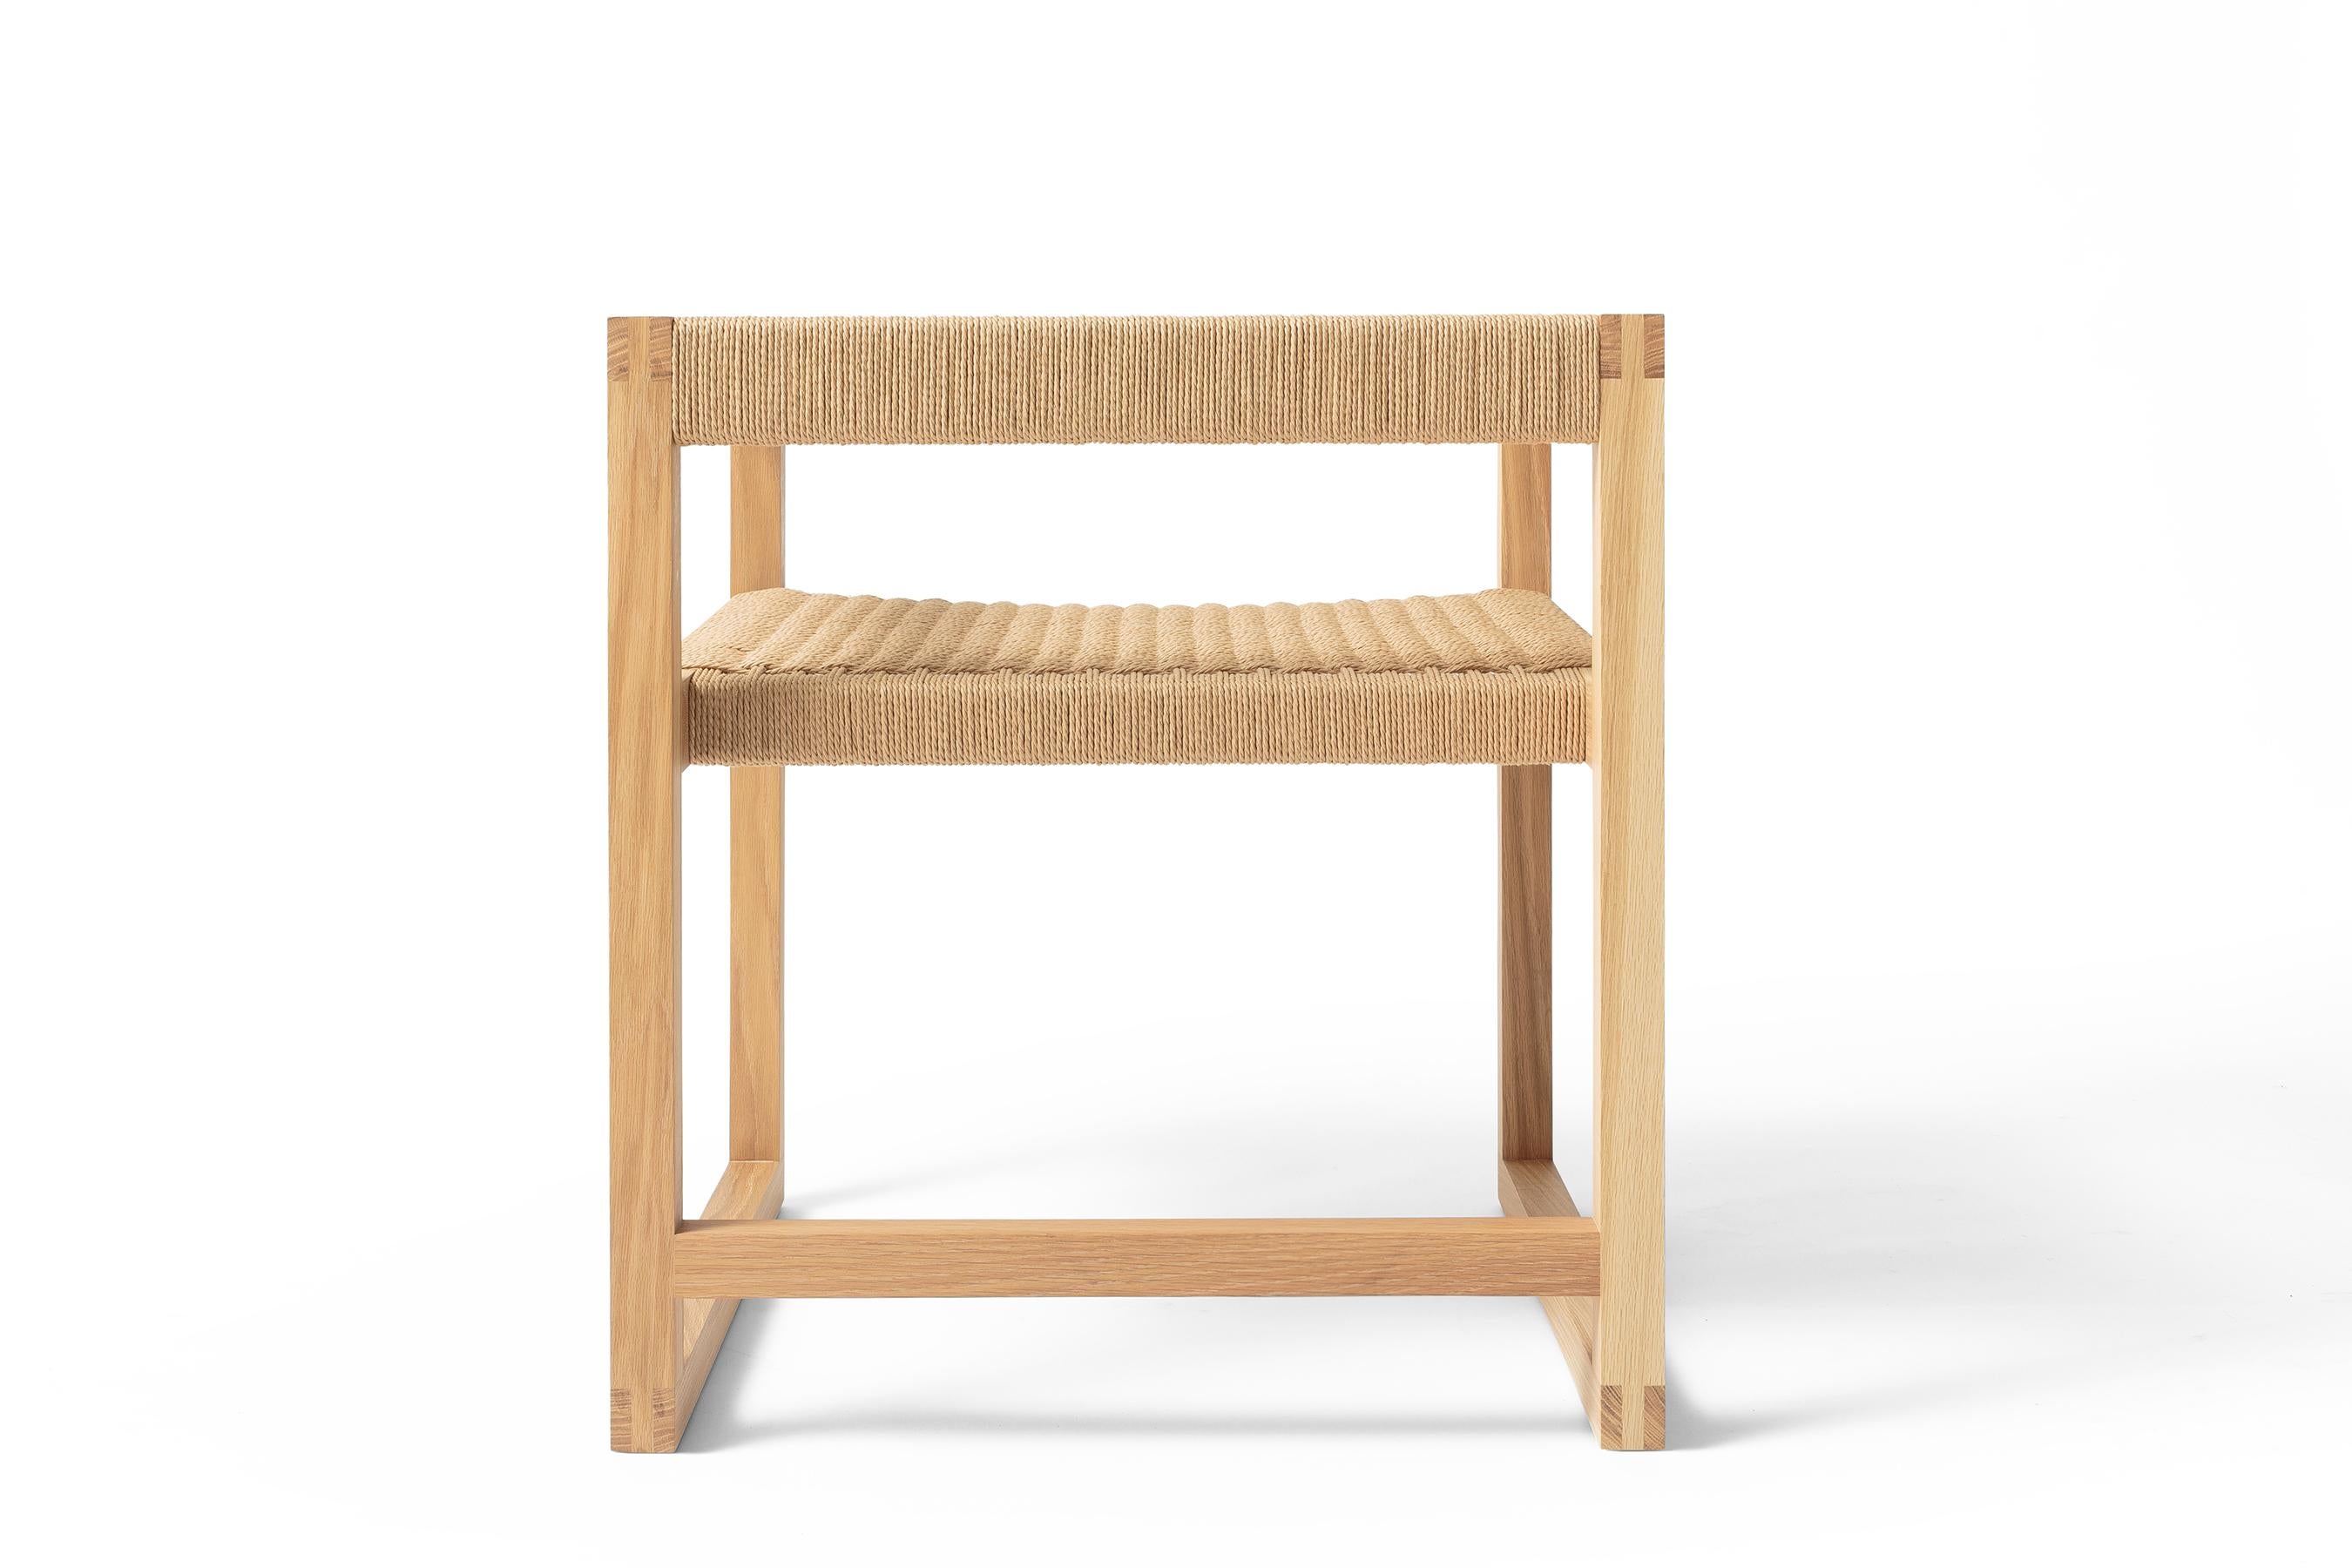 Featuring exposed joinery and a mixture of hard and soft lines the Canva Chair explores a love for material and craftsmanship welded with warm welcome. Constructed with an exposed, bridle-joint frame and handwoven seat, the Canva Chair is